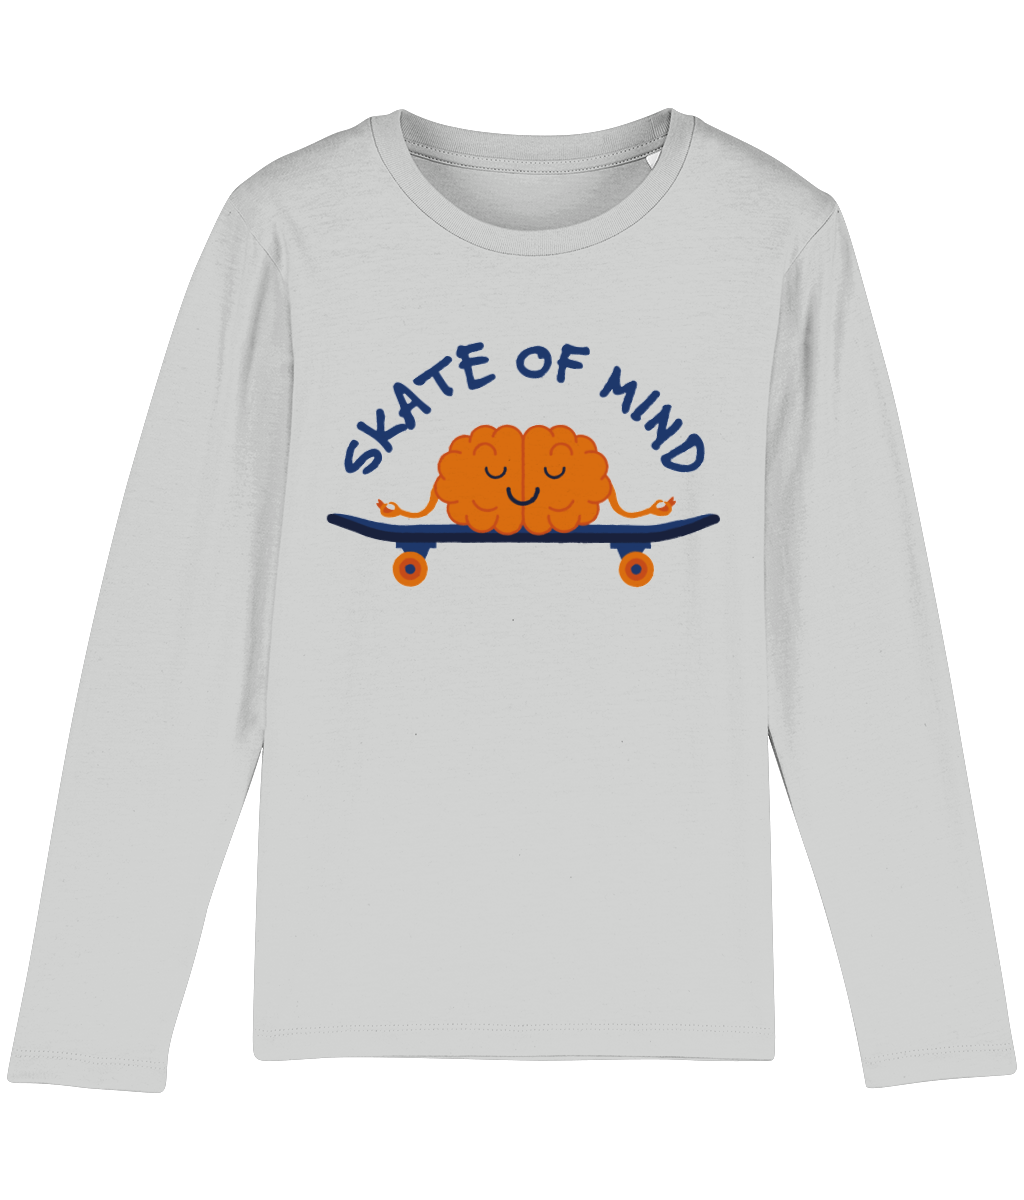 Long Sleeve T Shirt, 100% Organic Soft Cotton, It's just a 'Skate Of Mind'